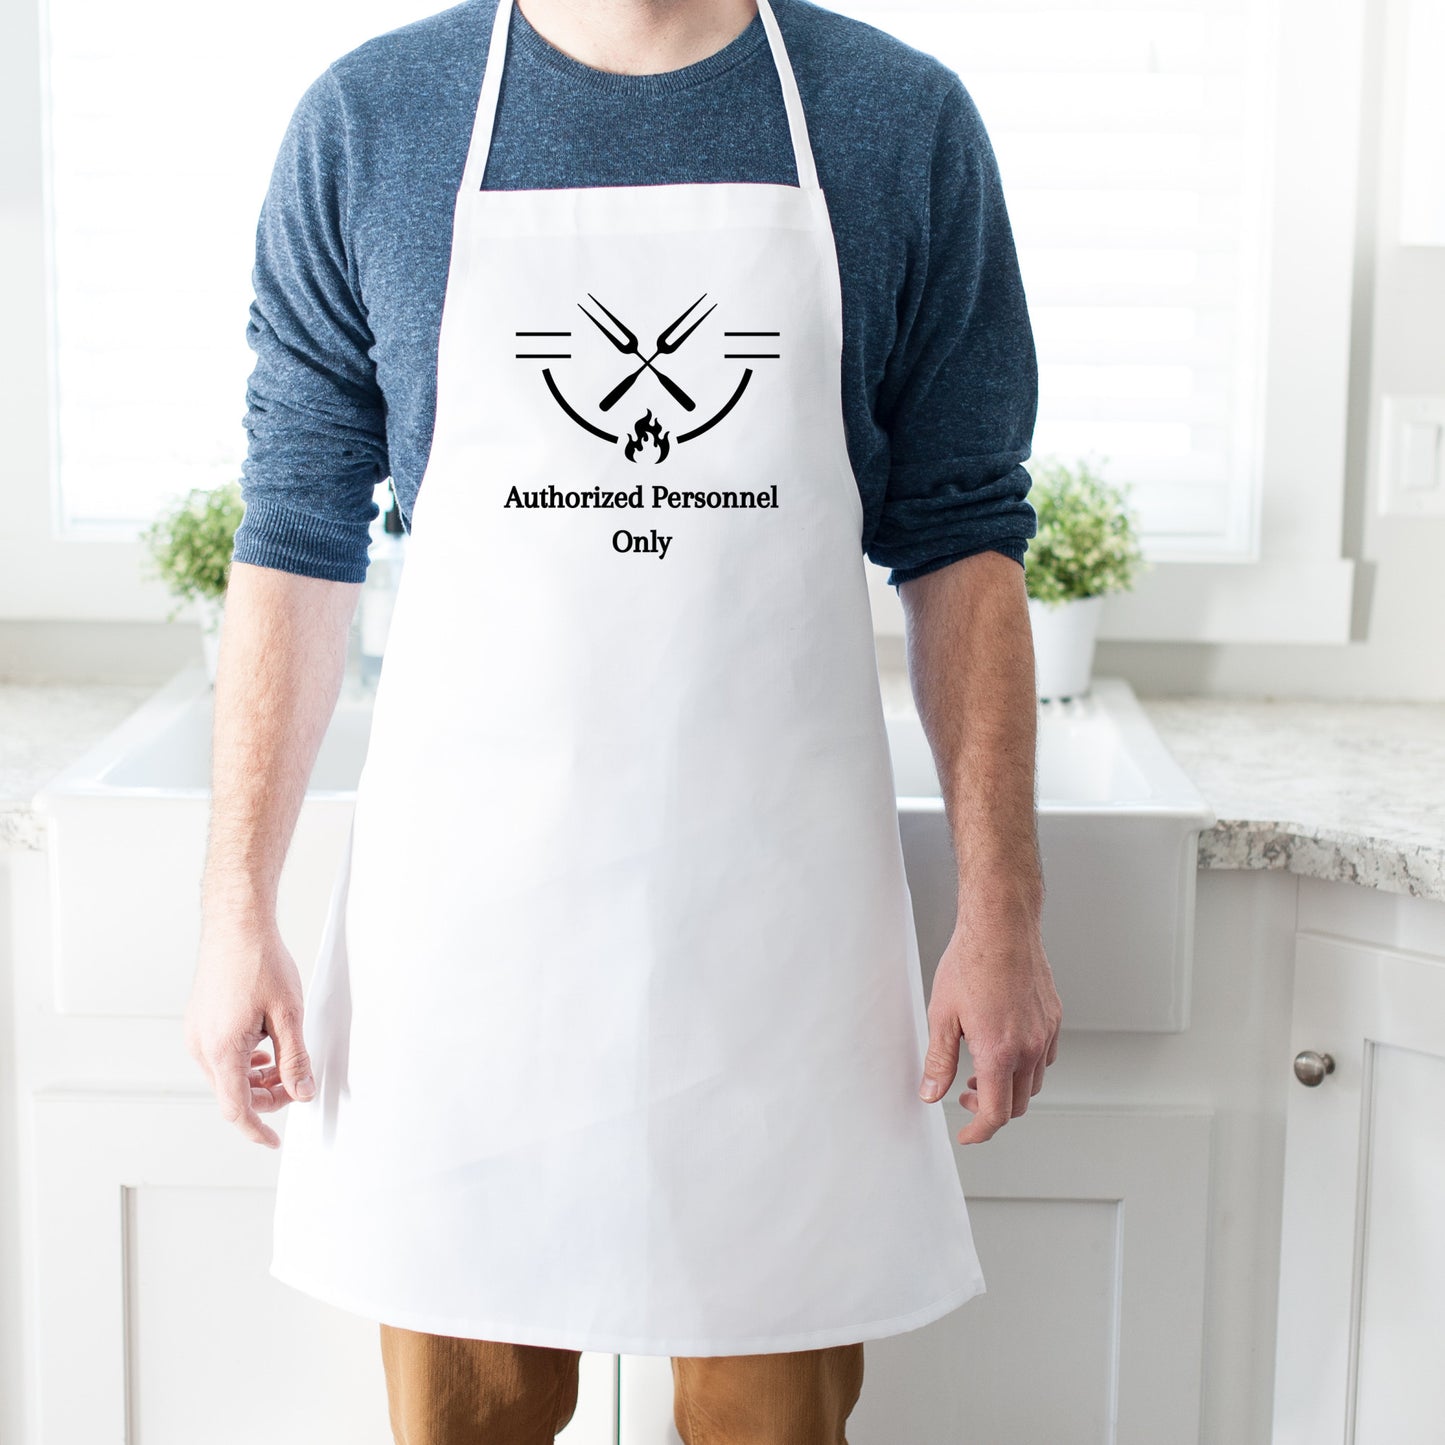 Classic White Apron - Authorized Personnel Only